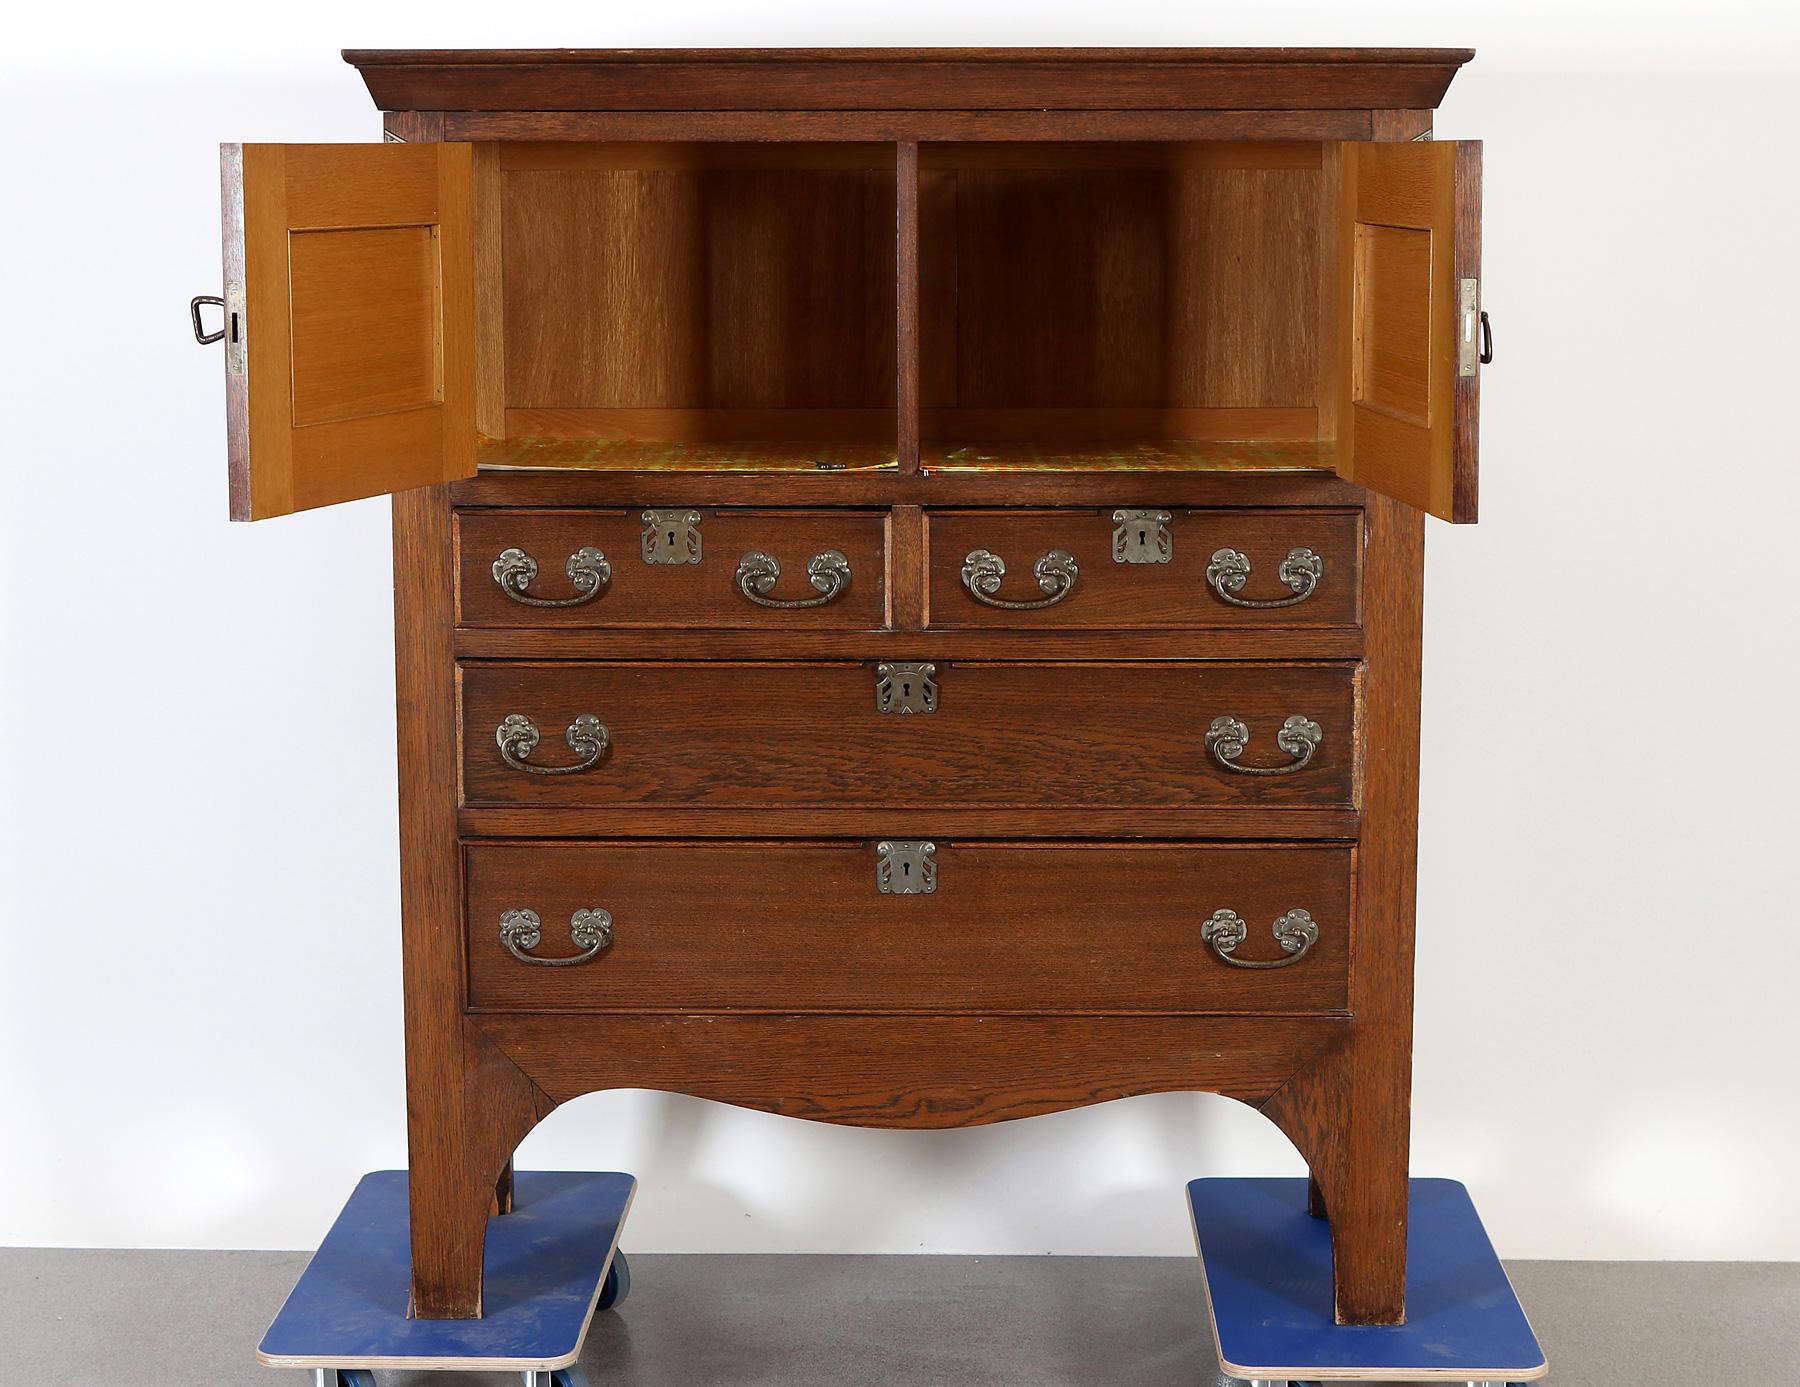 German Art & Craft Cabinet Chest of Drawers from circa 1910